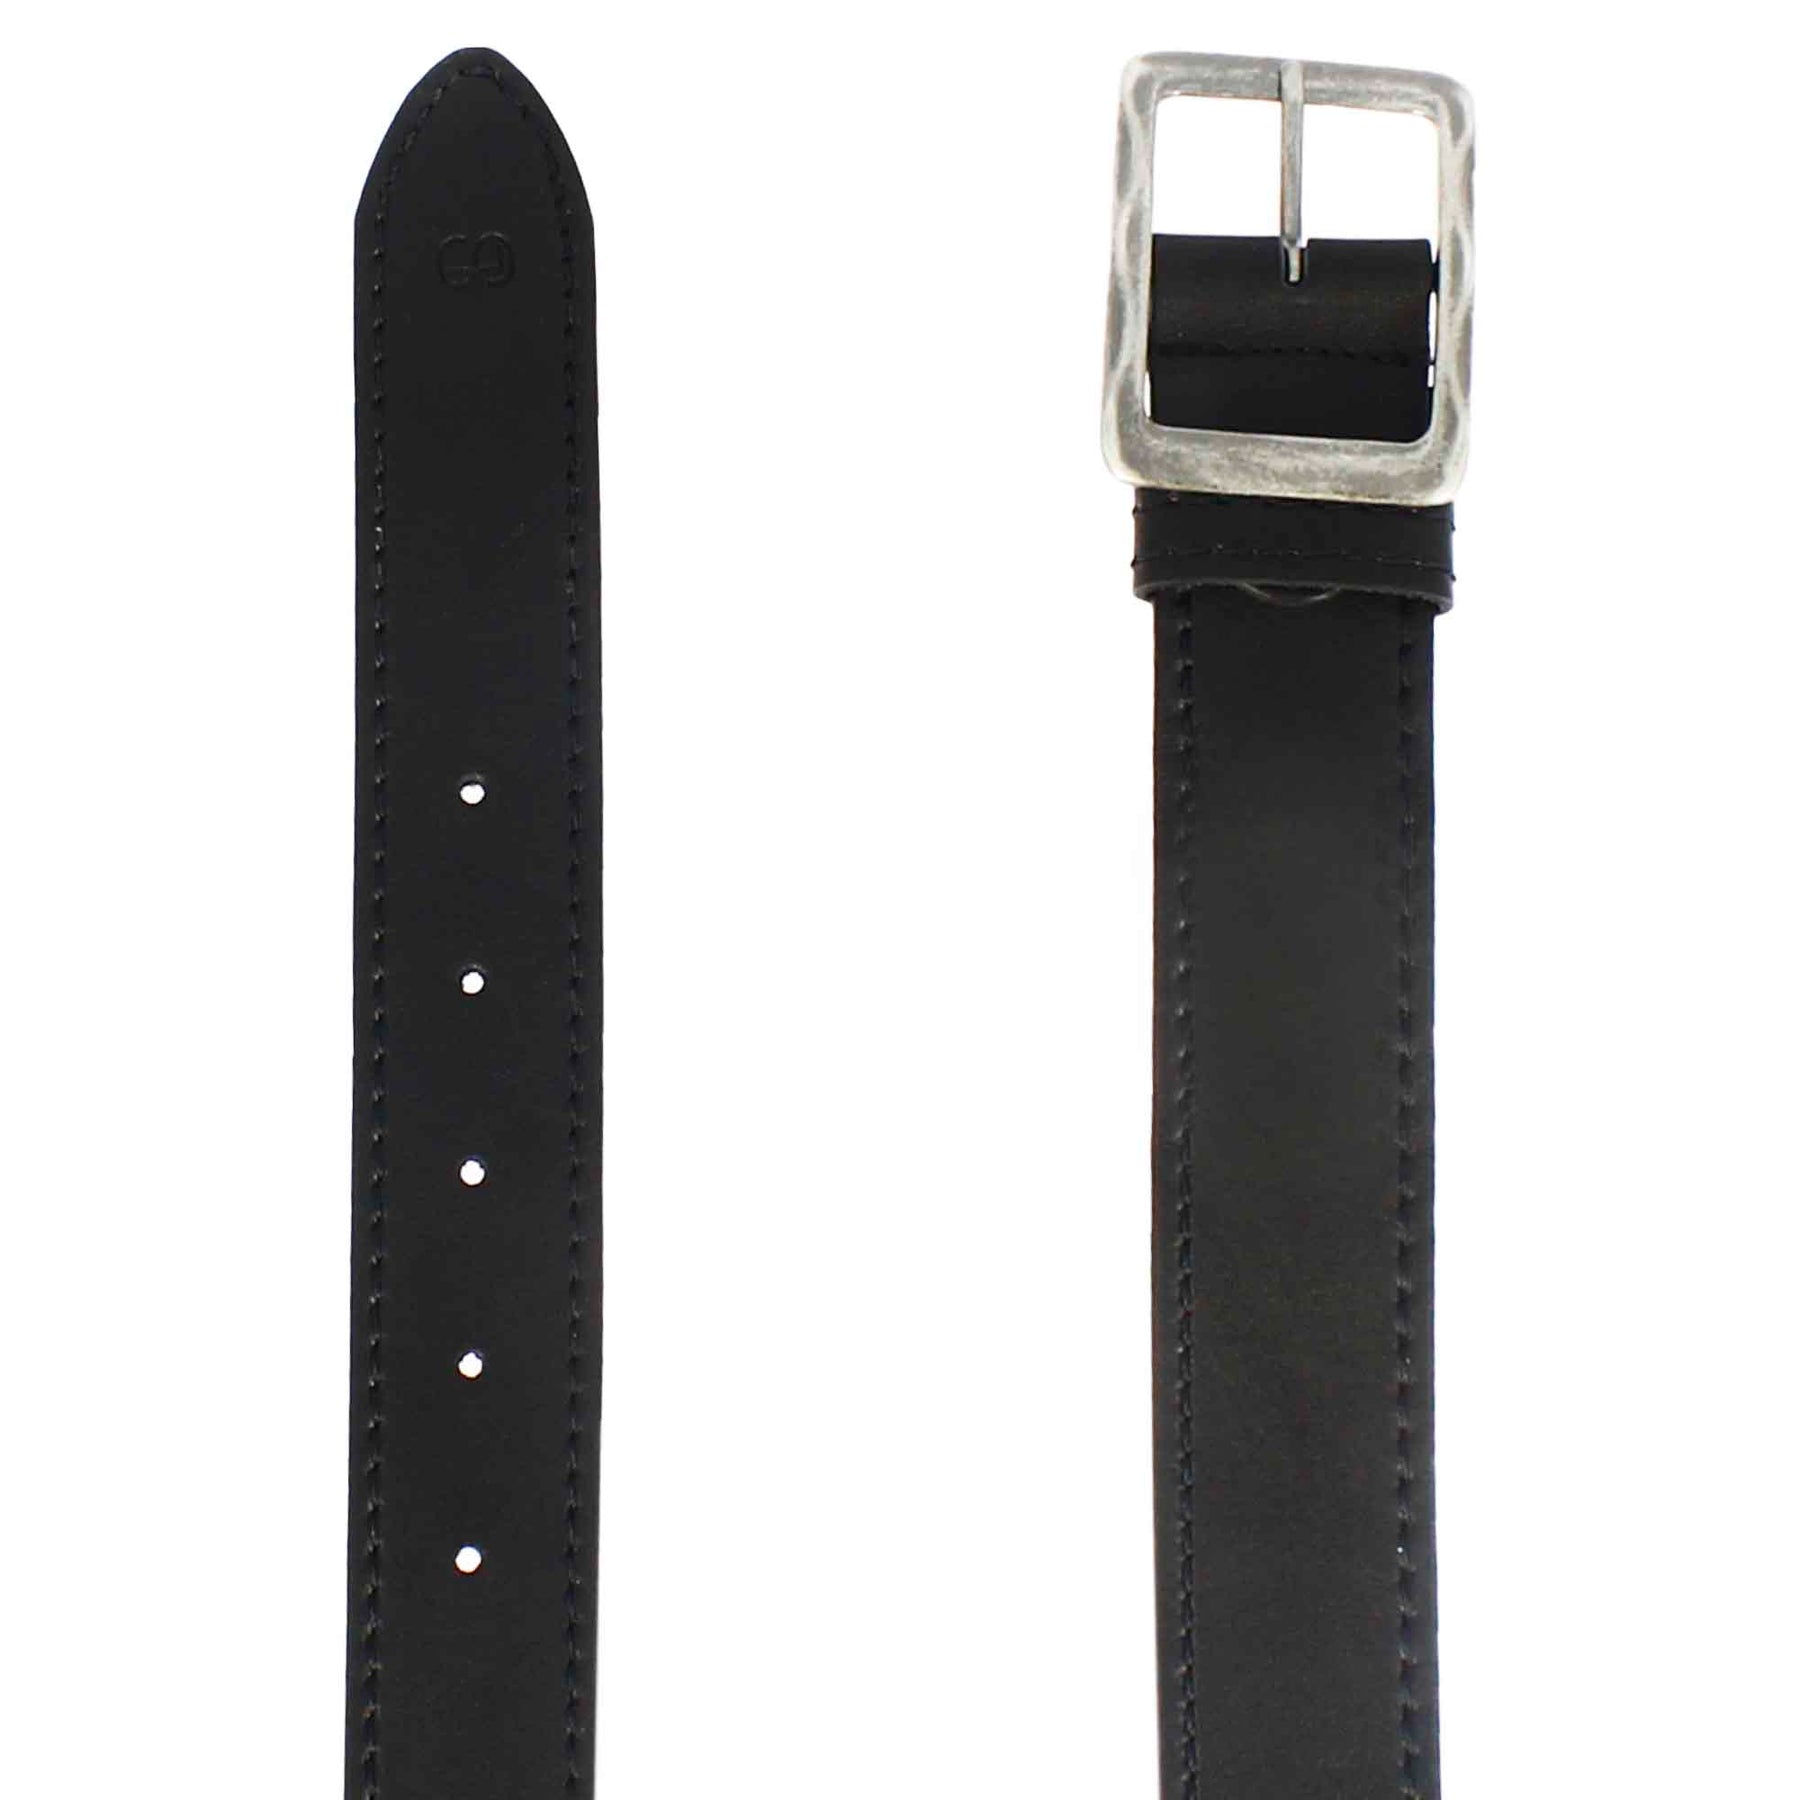 Classic men's belt in black leather with stitching